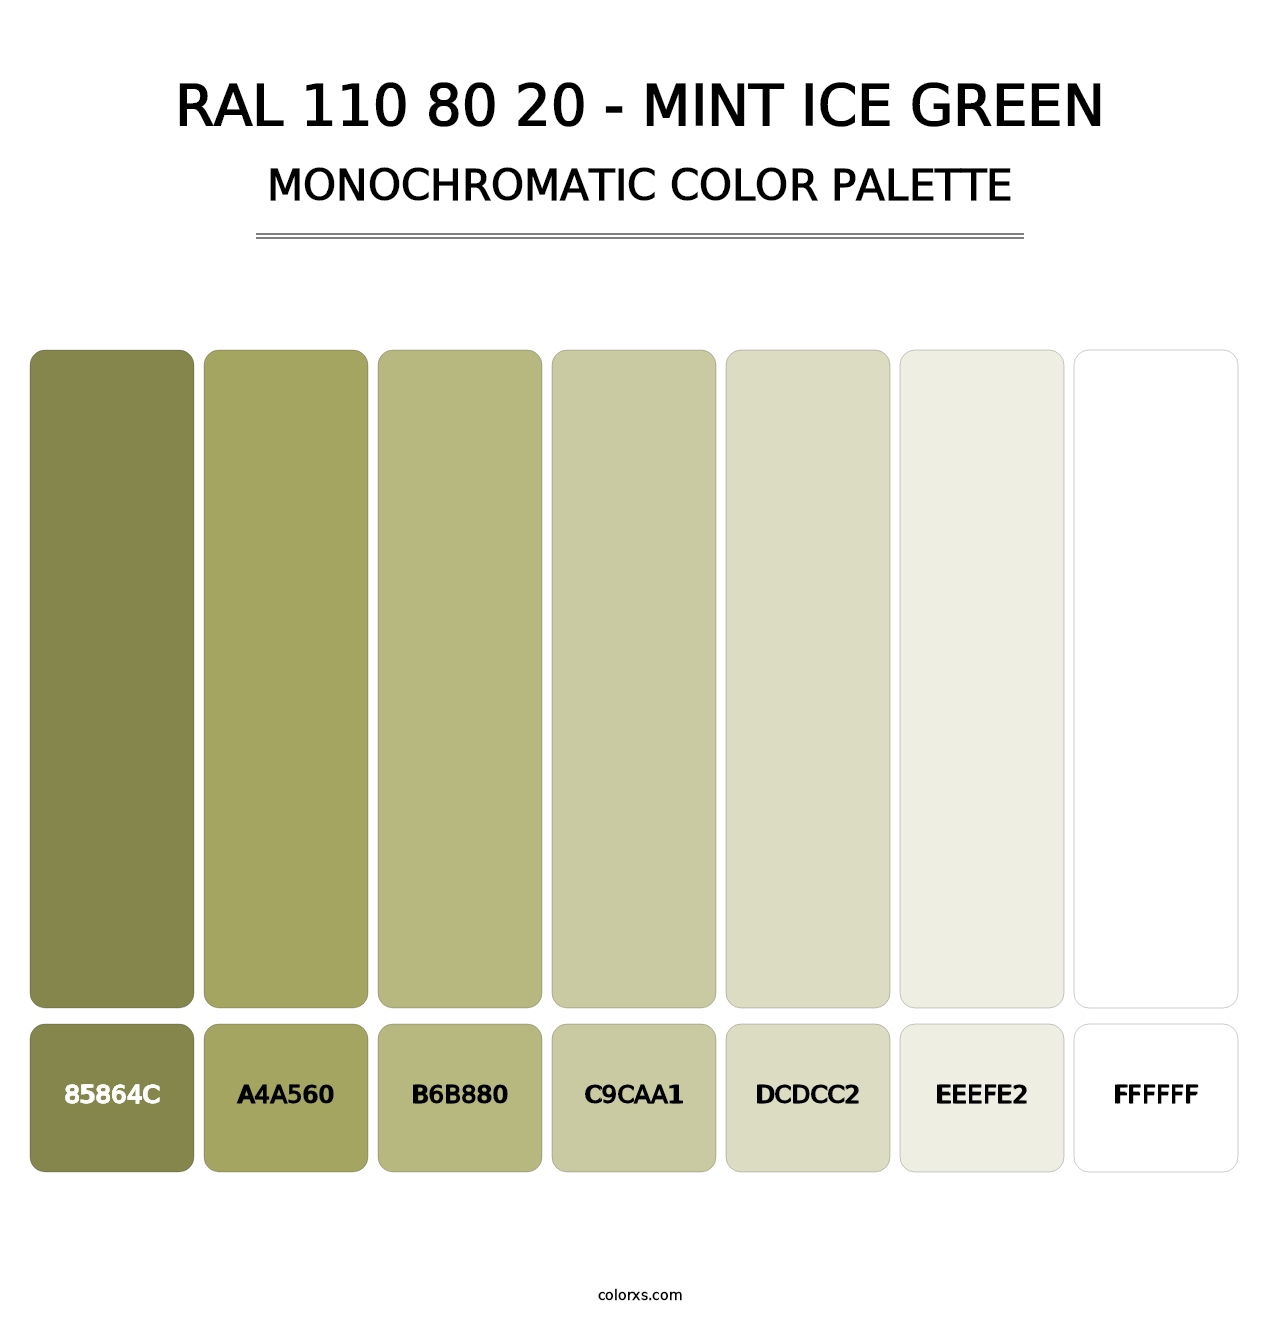 RAL 110 80 20 - Mint Ice Green - Monochromatic Color Palette